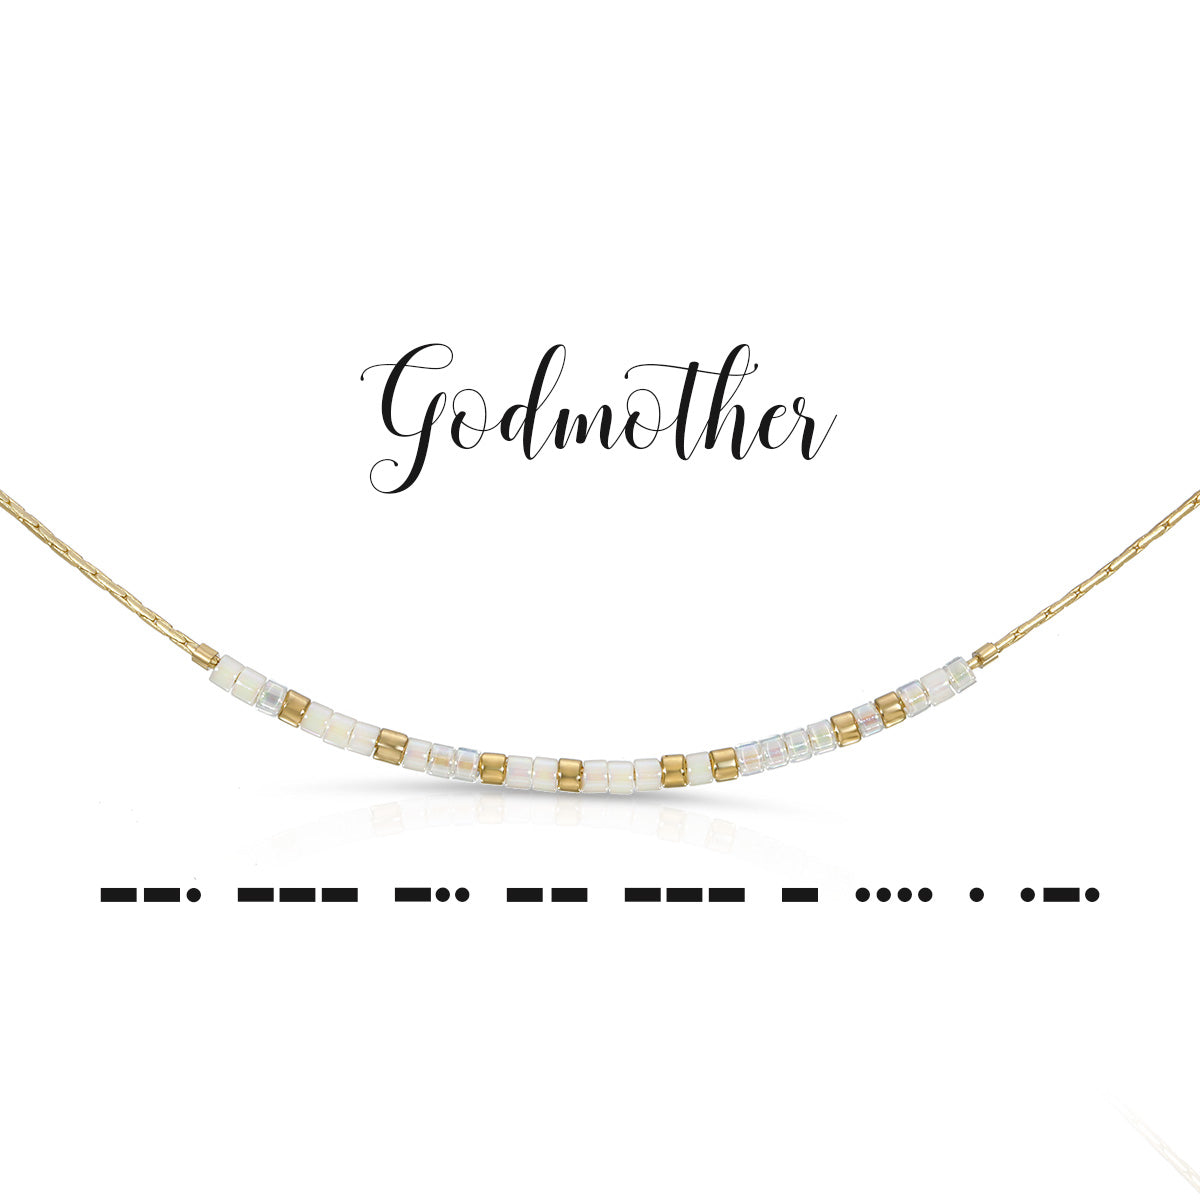 Dot and Dash Necklace - Godmother